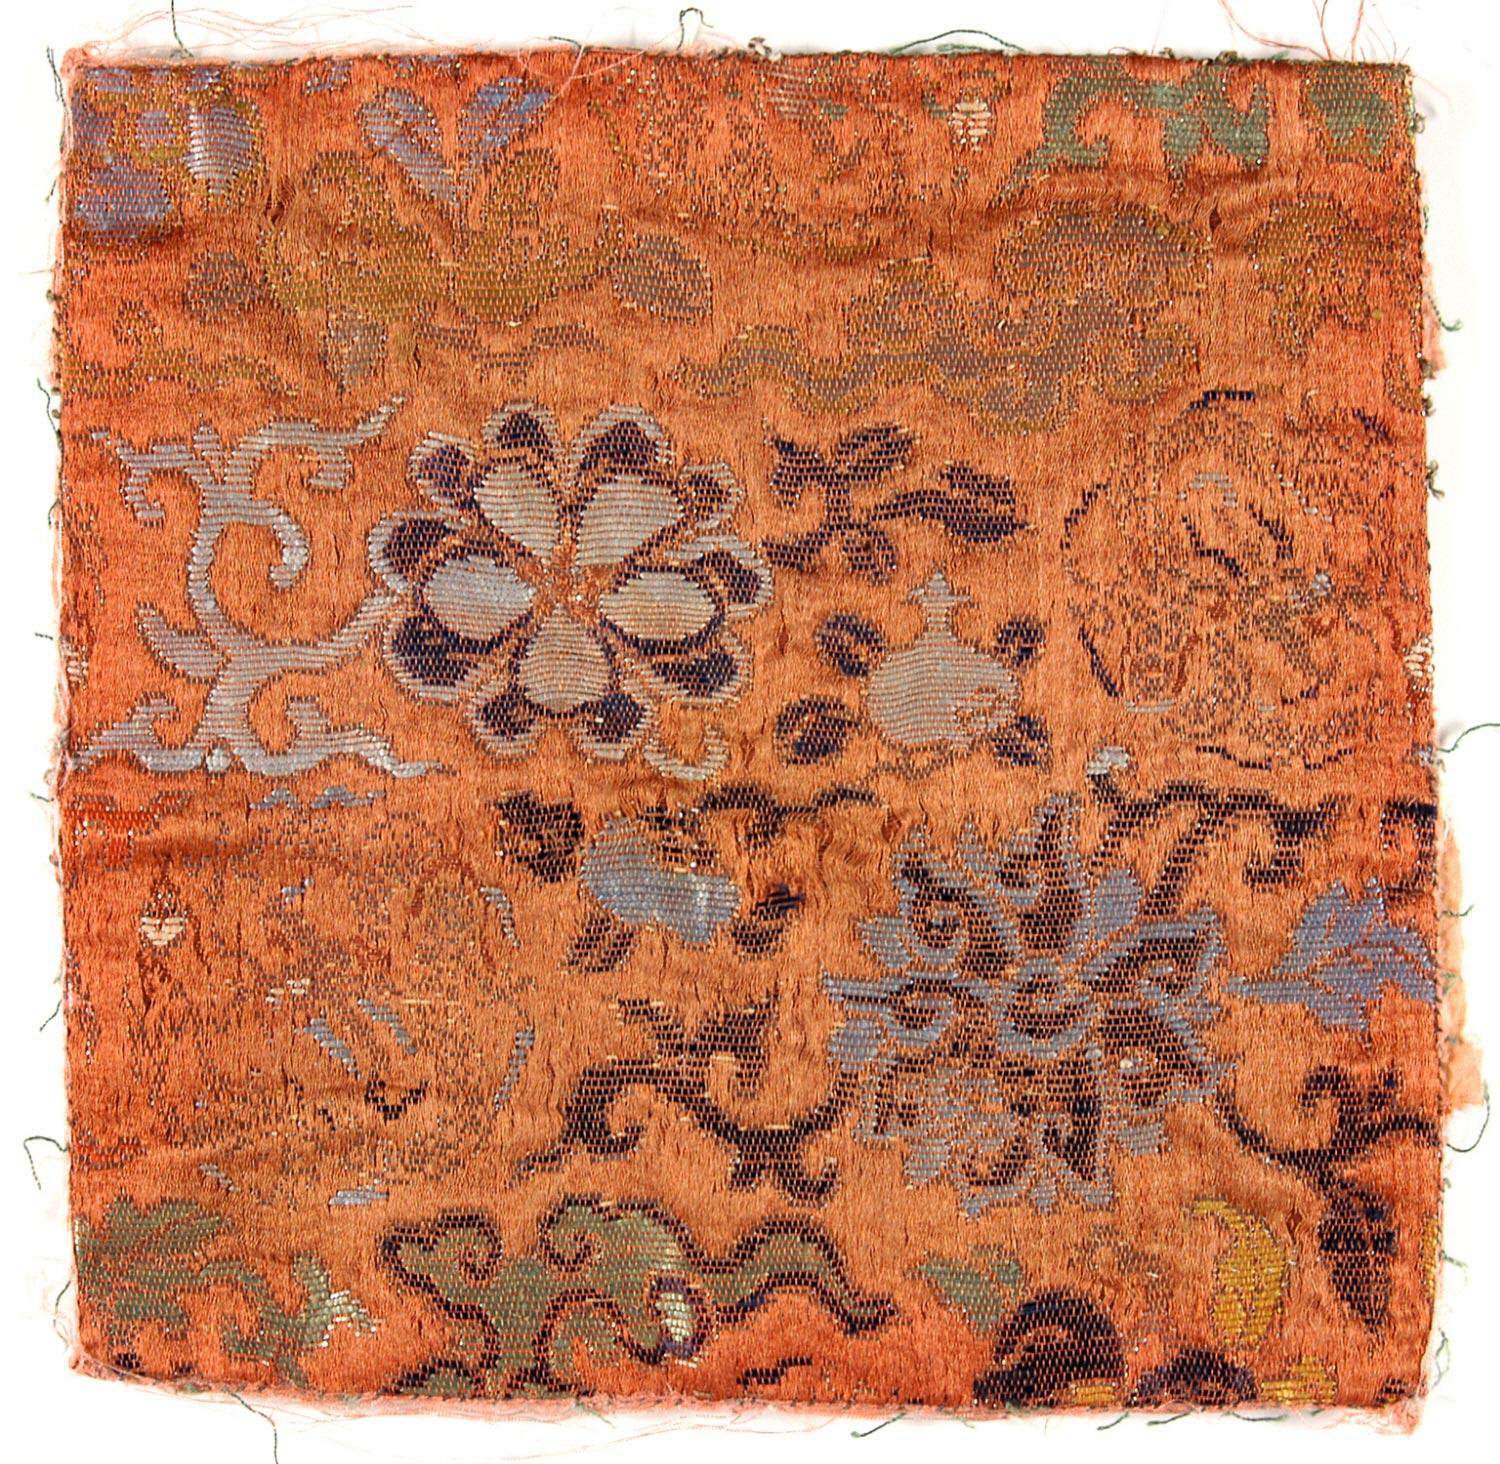 Woven Textile 1736-1850 Artist/maker unknown, Chinese